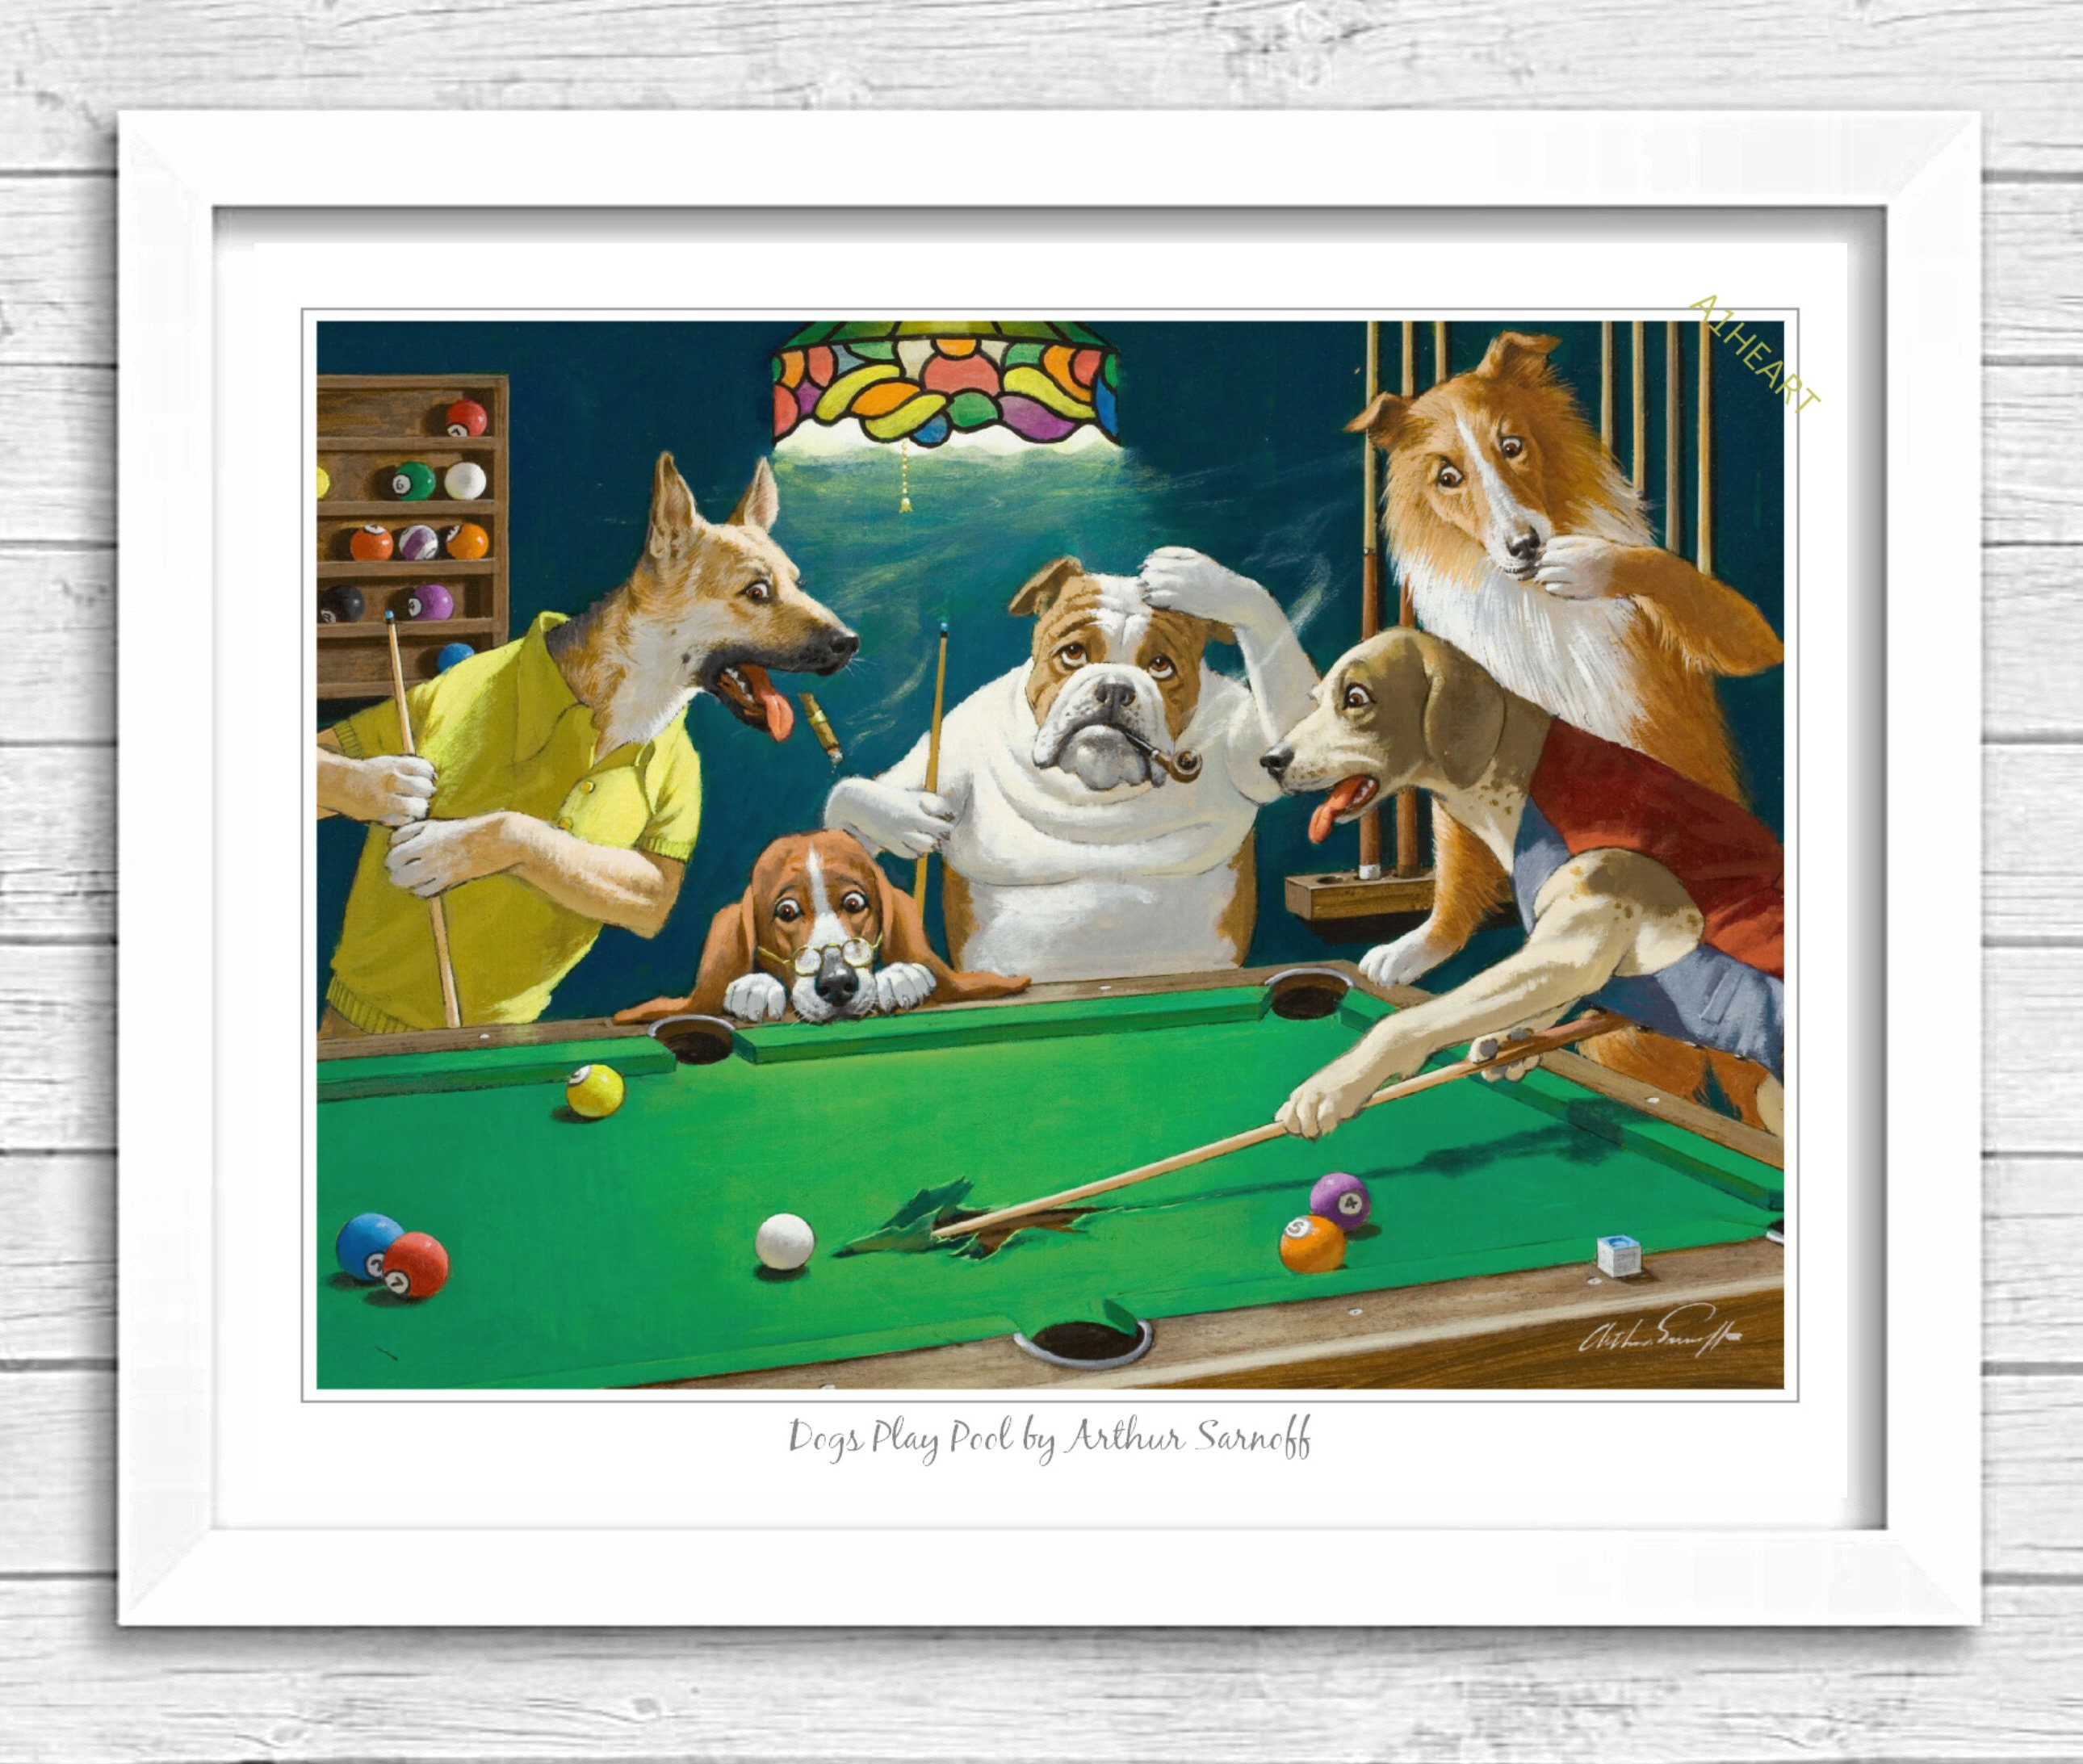 Dogs Play Pool by Arthur Sarnoff Poster Print